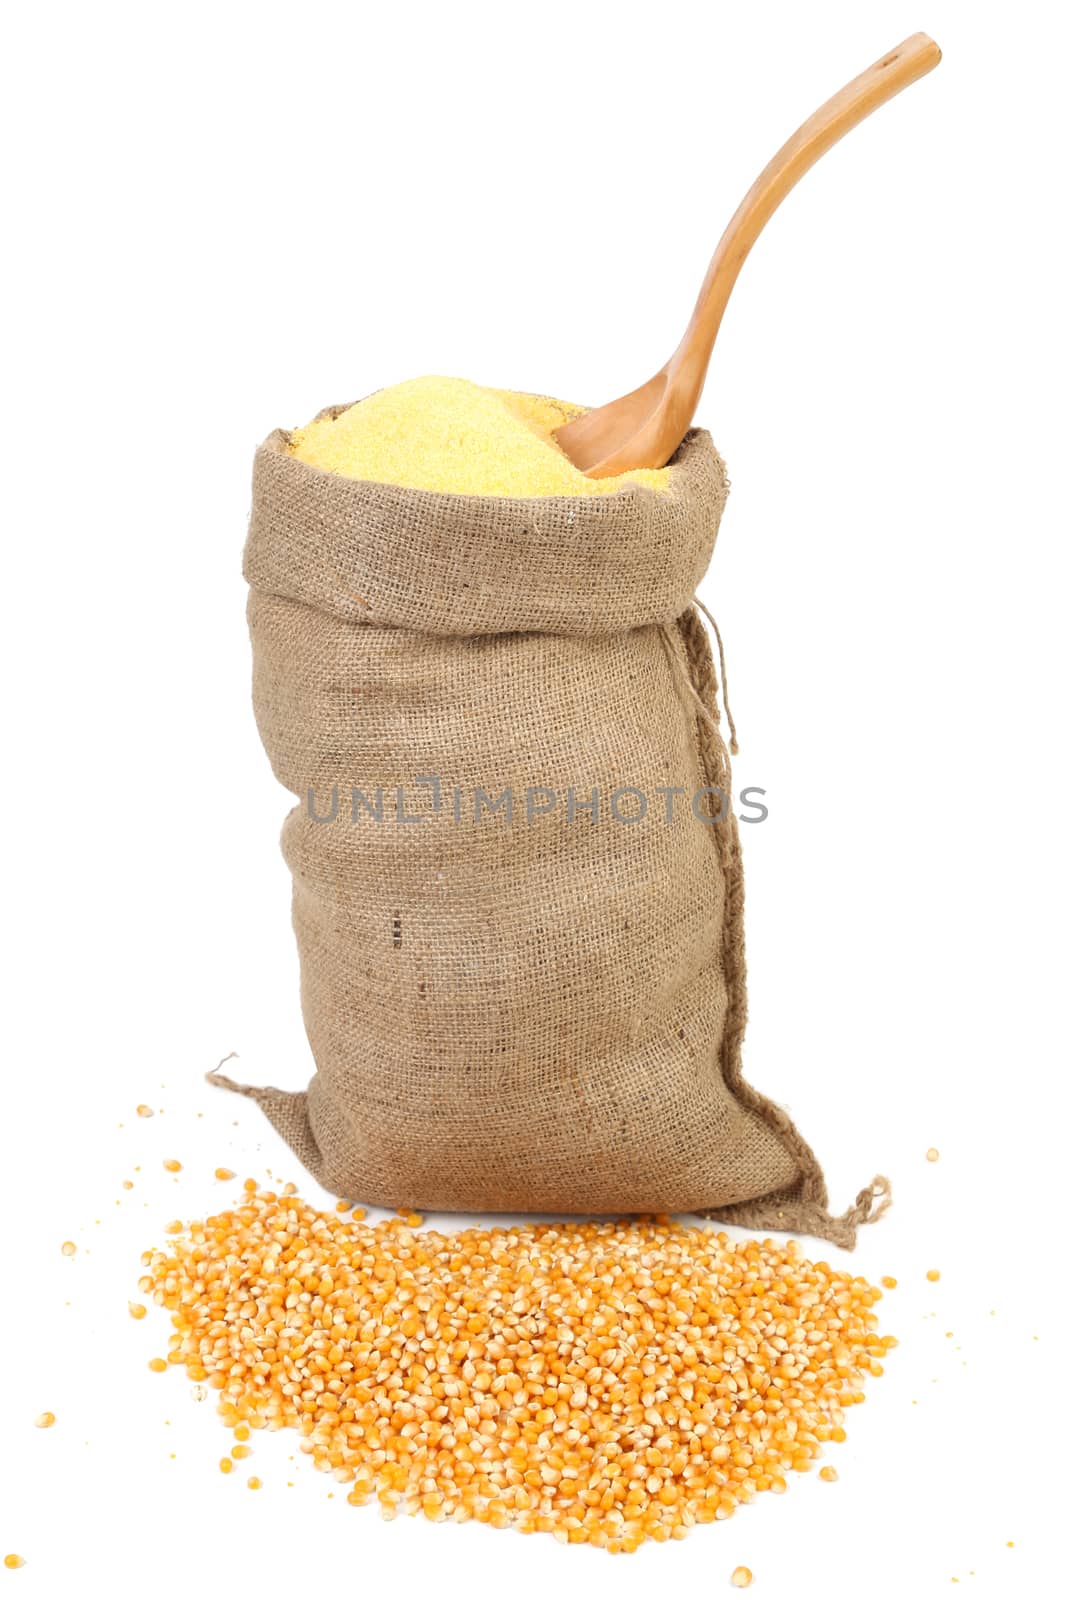 Sack with corn grains and flour. Isolated on a white background.